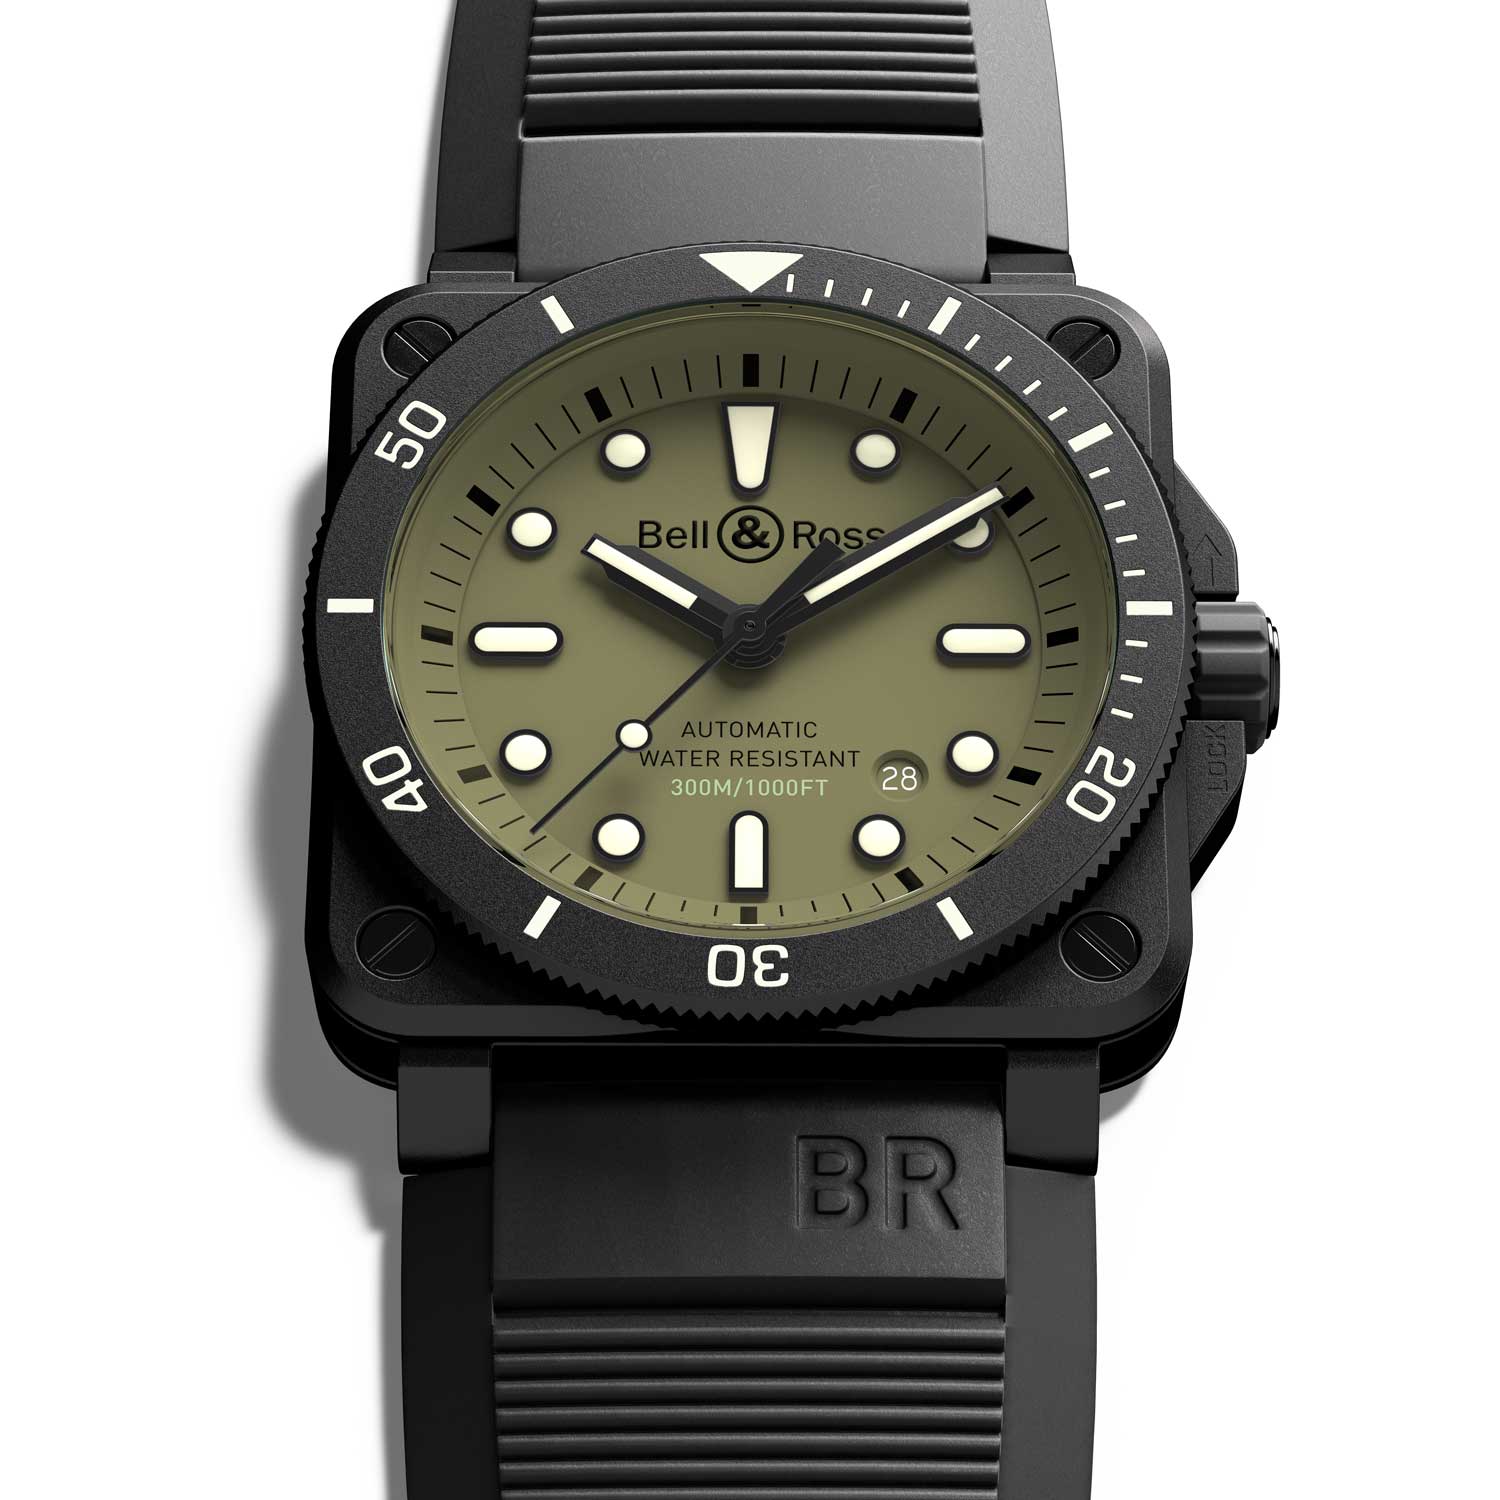 The new Diver Military is limited to 900 pieces.